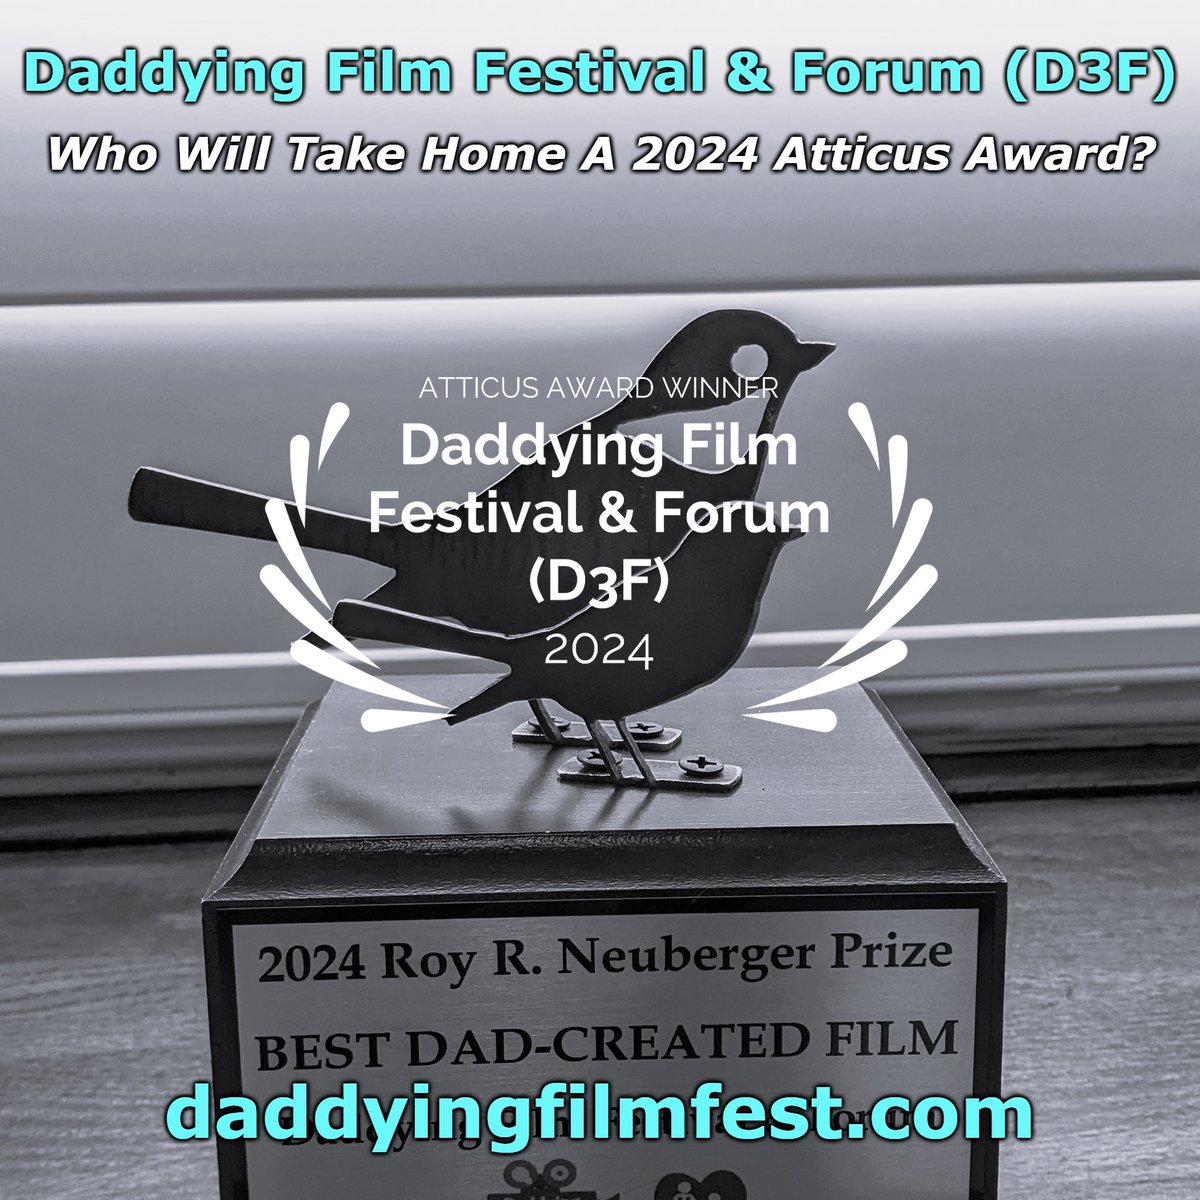 LAST CALL! Today's the LAST day to screen #DADDYING #FilmFestival's 40+ short/feature films celebrating involved dads - til 9pm ET. Get FREE passes, vote for your fav finalists: daddyingfilmfest.com/get-free-passes

@_TeamBlogger @equimundo_org @ArtEddy3 @Fathersincorp @homedadnet @ParentCamp